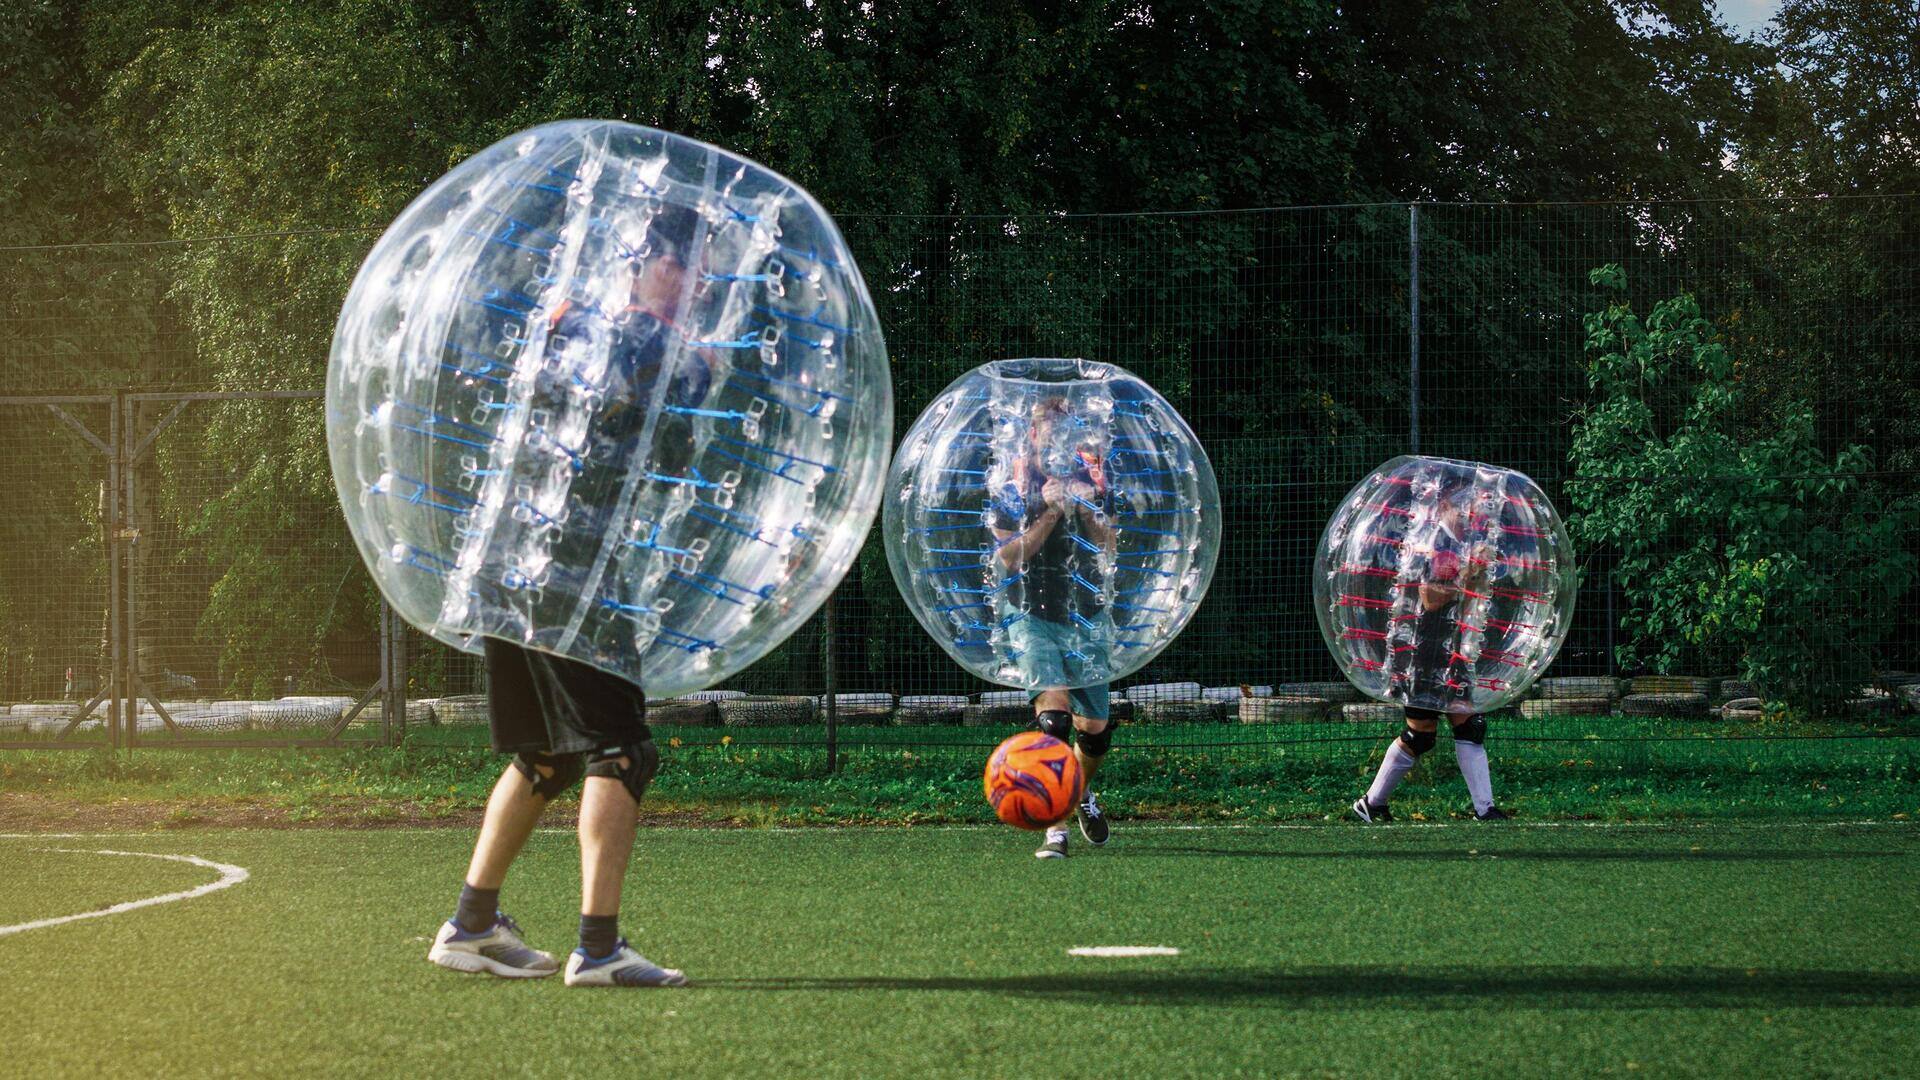 Zorbing: Harnessing the fun of rolling down in spheres